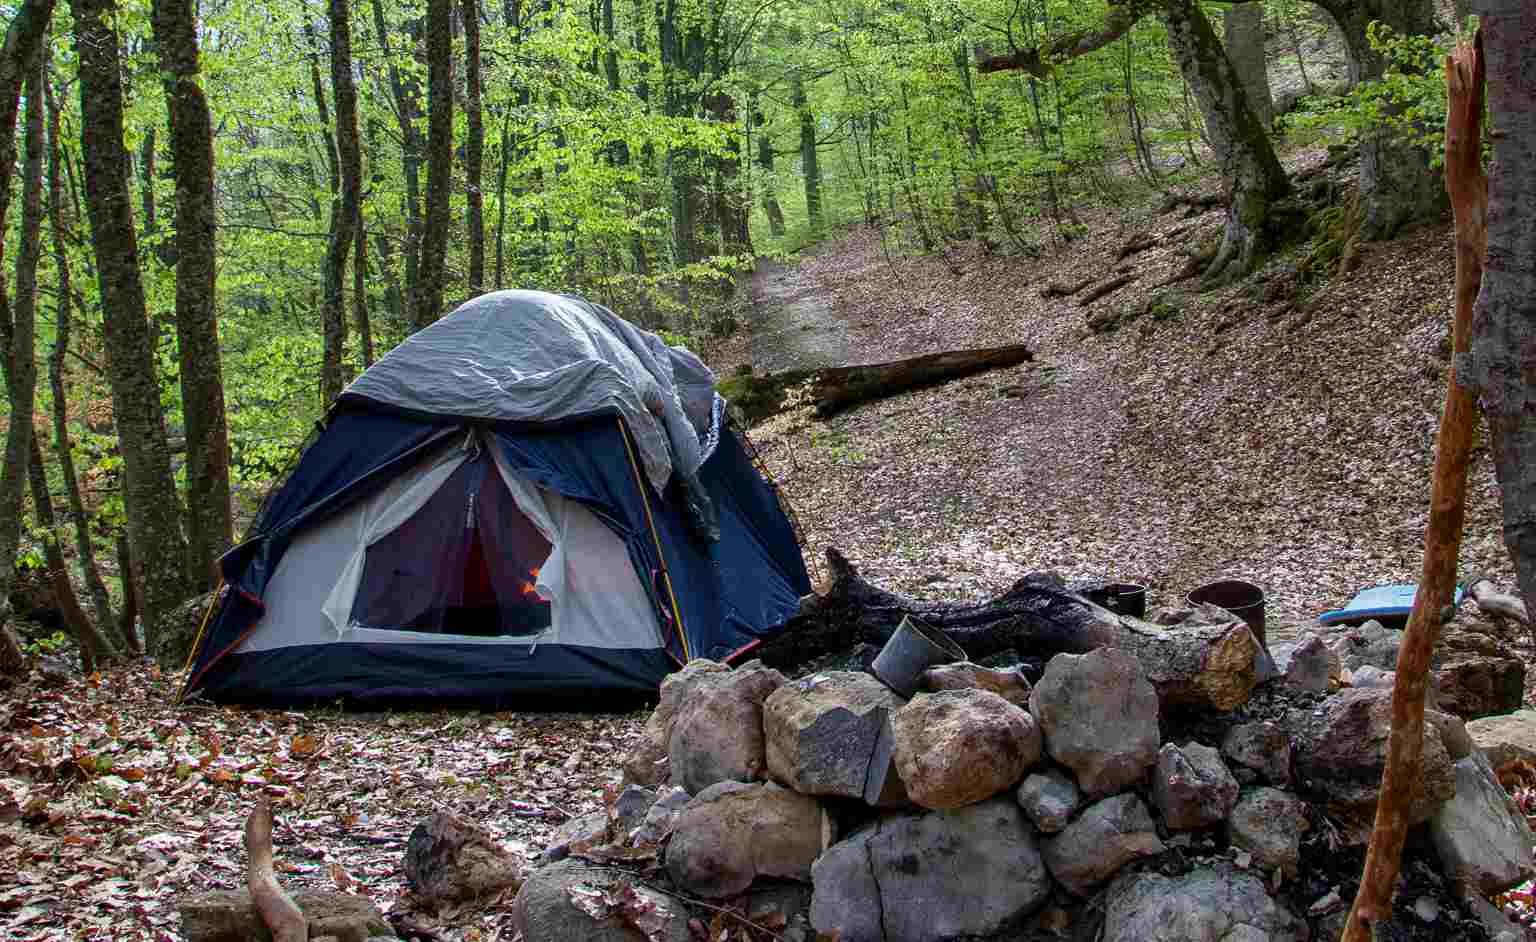 What's The Difference Between A 3 and 4 Season Tent?